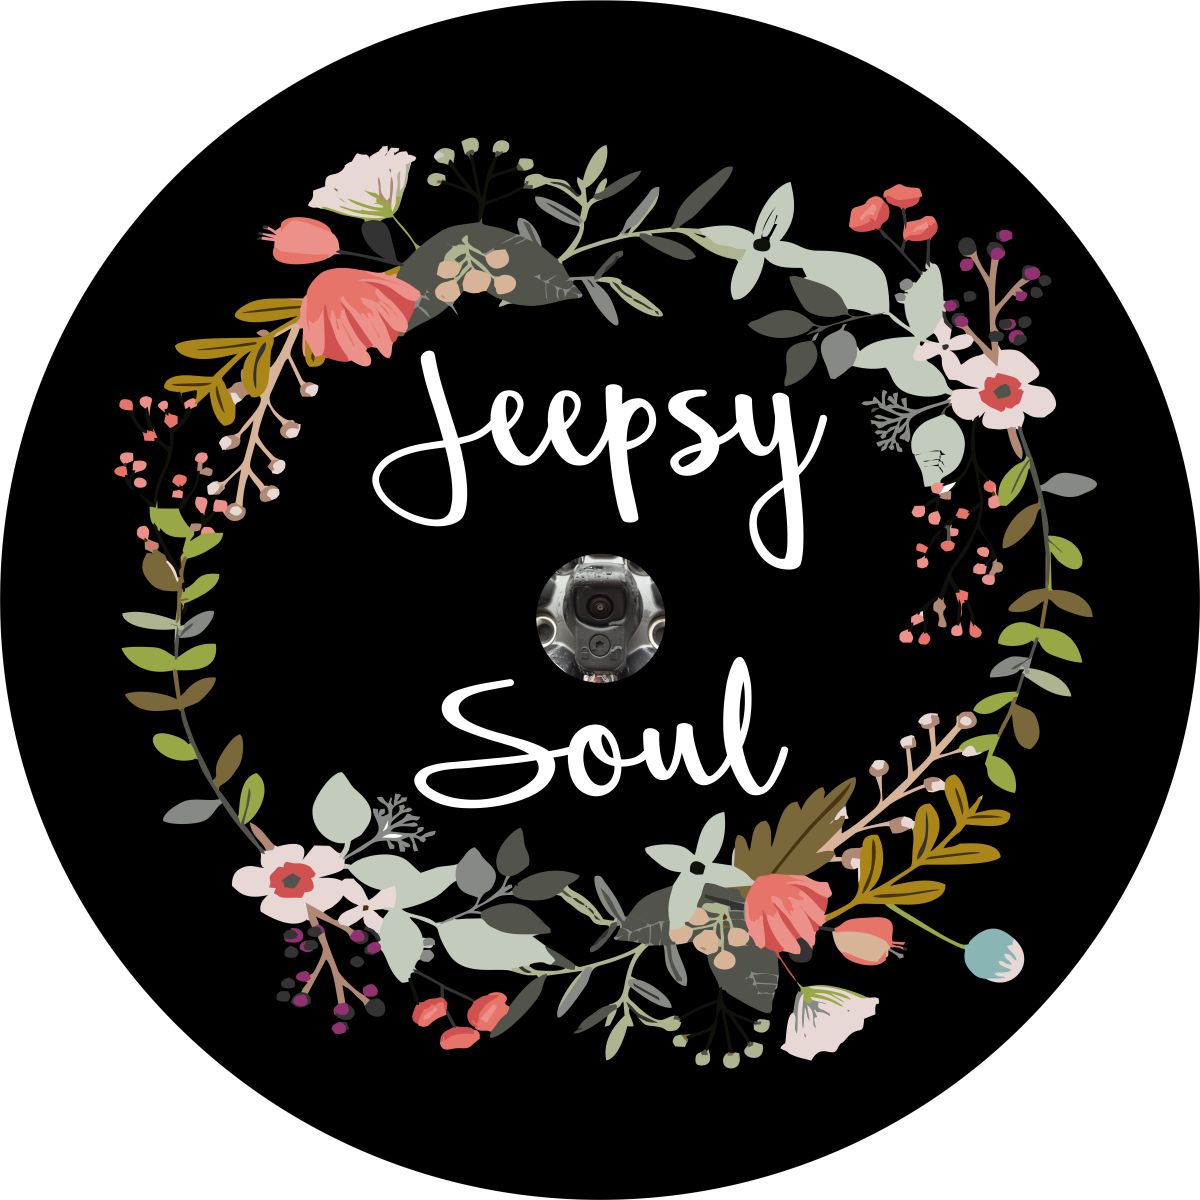 Floral wreath around Jeepsy soul spare tire cover design for Jeep with JL back up camera